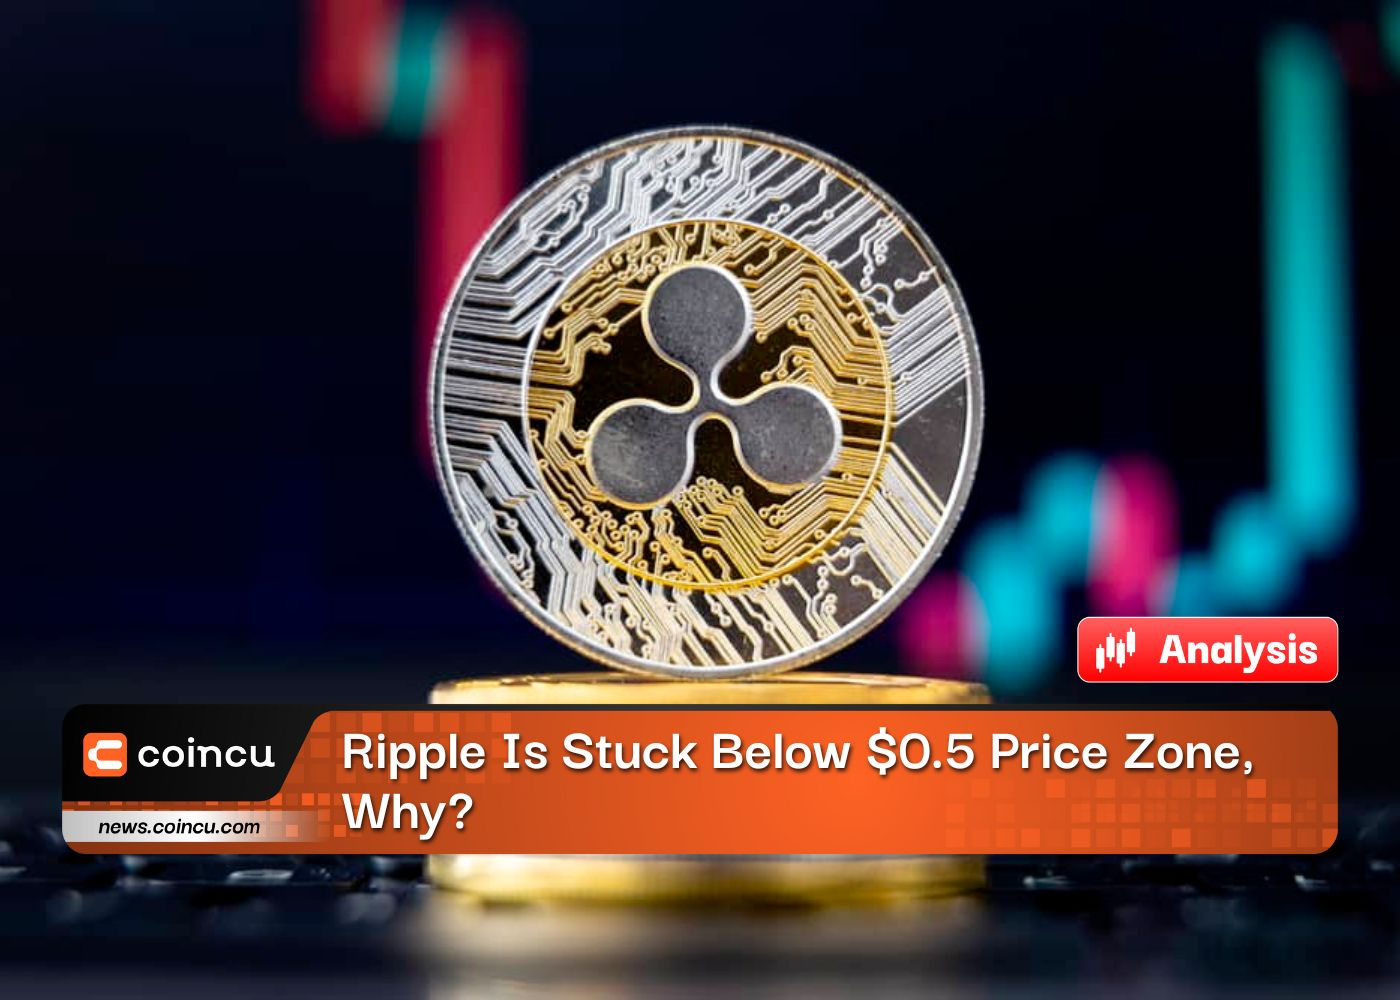 Ripple Is Stuck Below $0.5 Price Zone, Why?